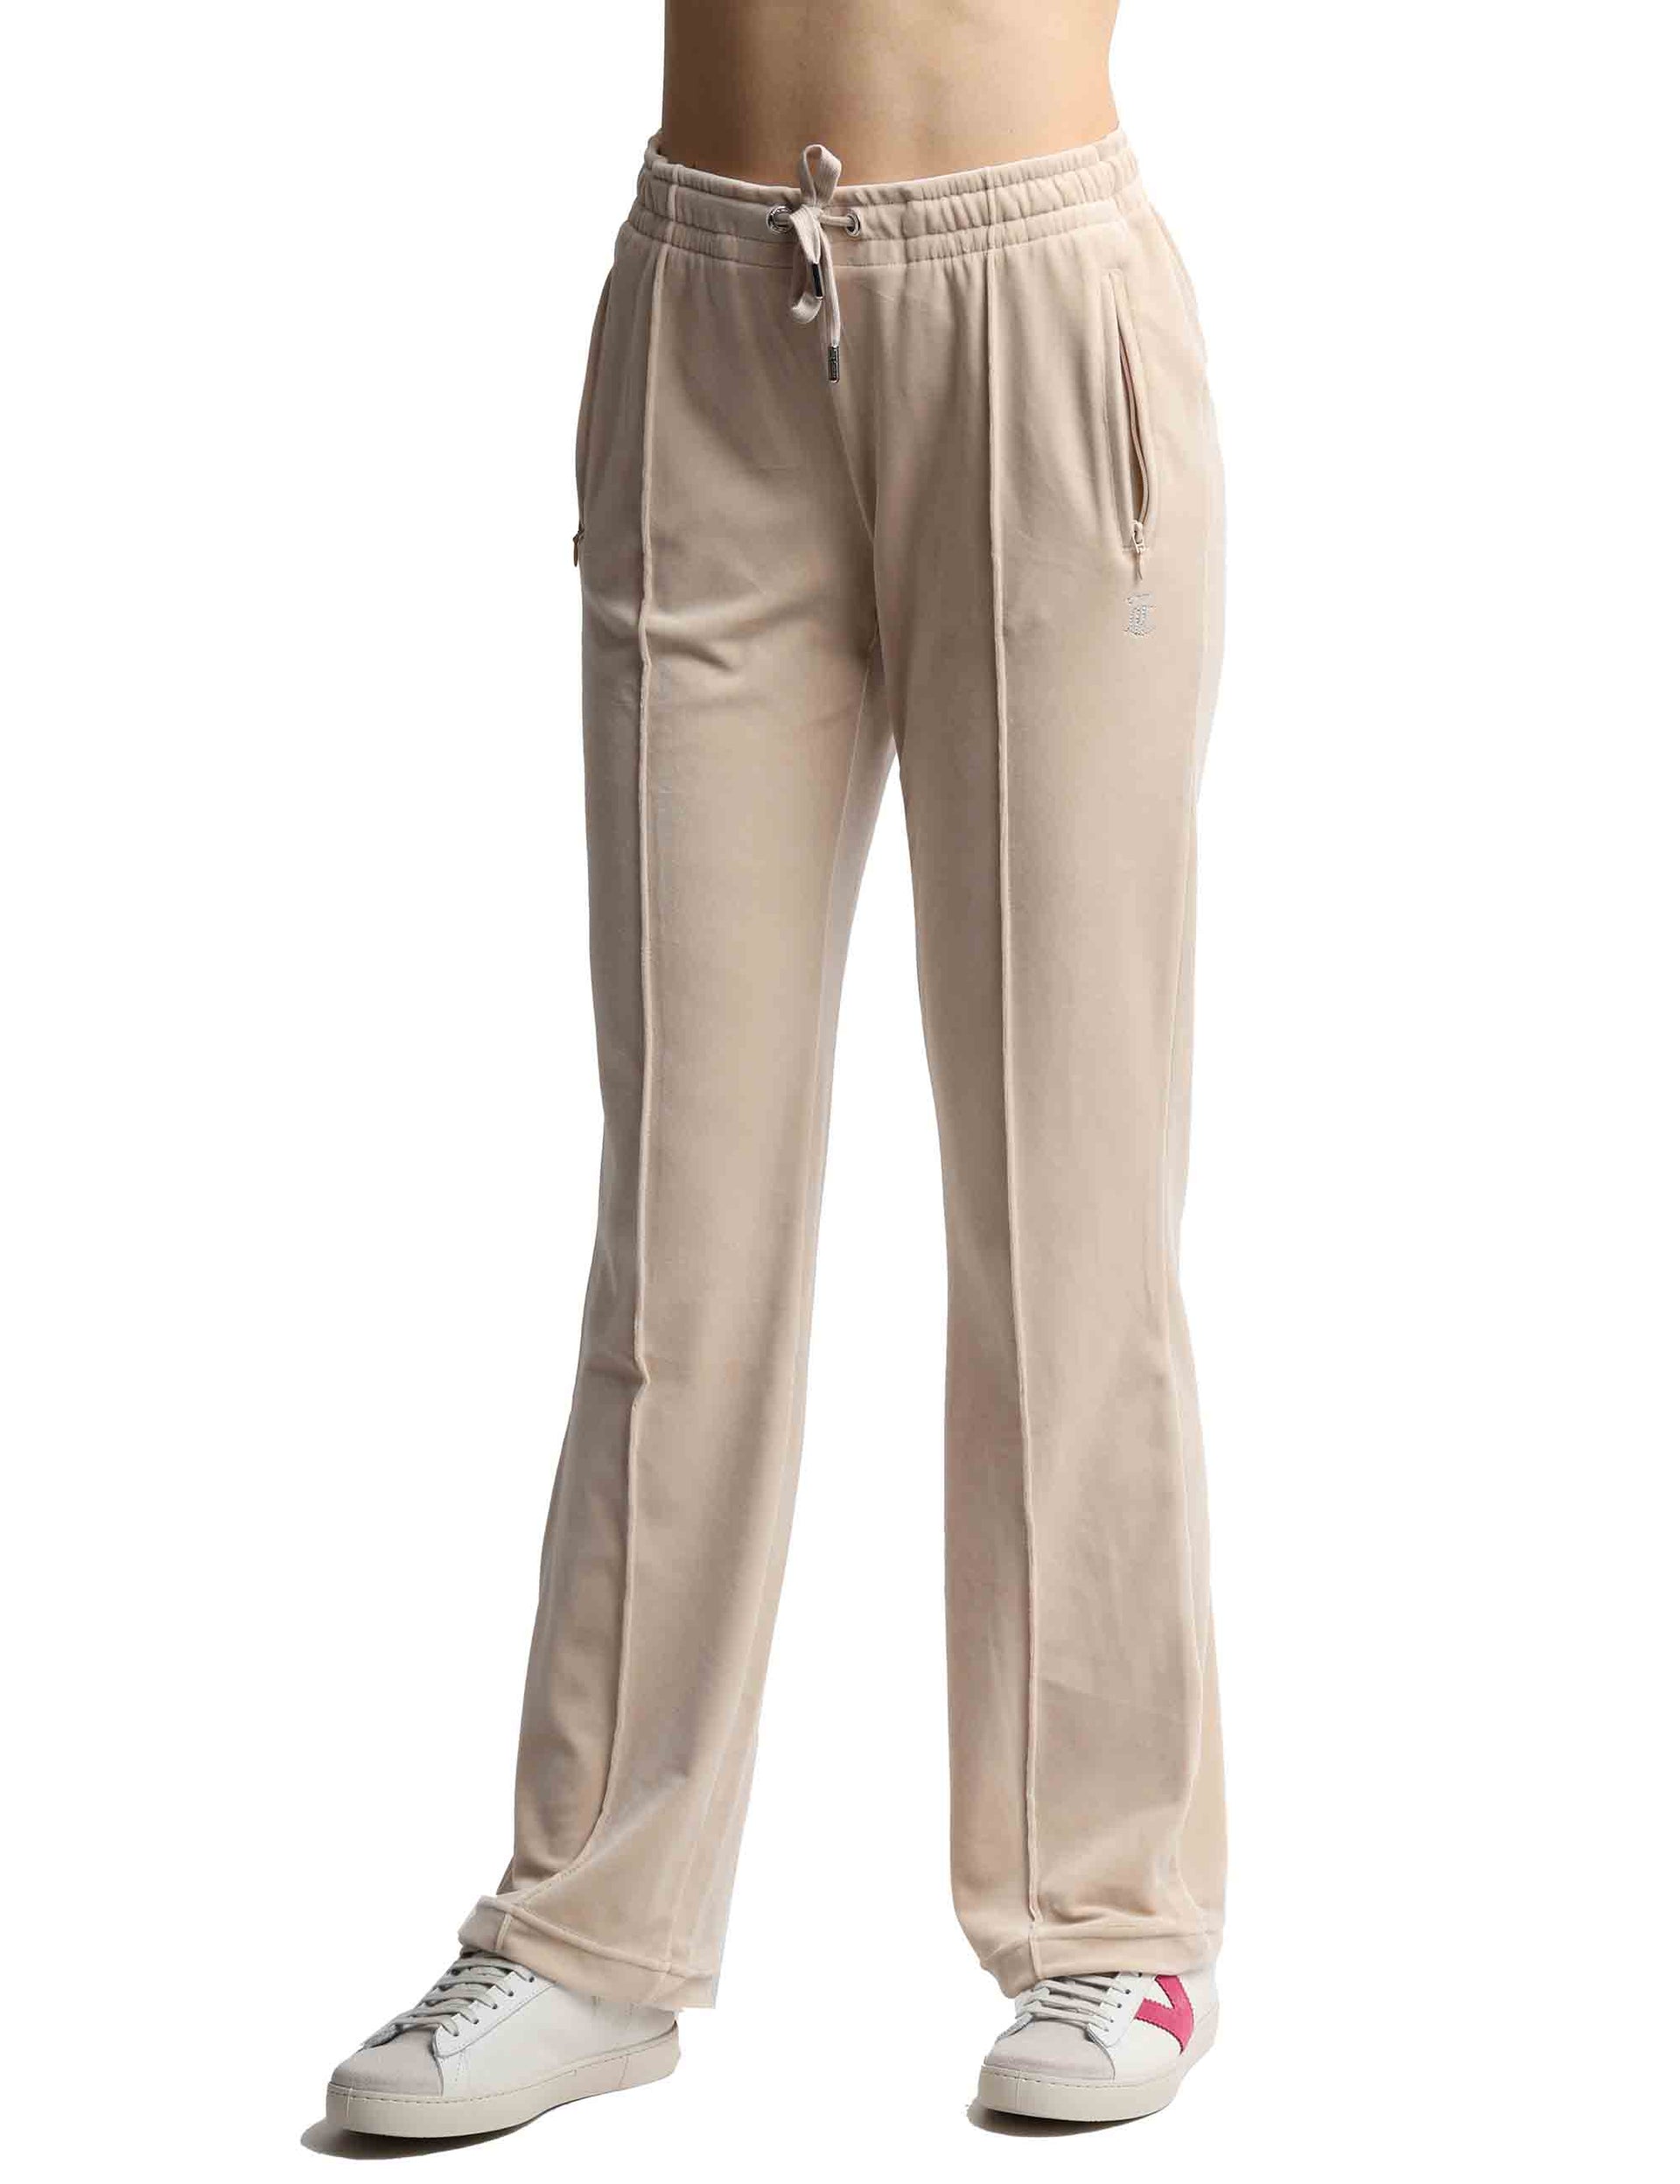 Tina women's tracksuit trousers in beige fabric with rhinestones